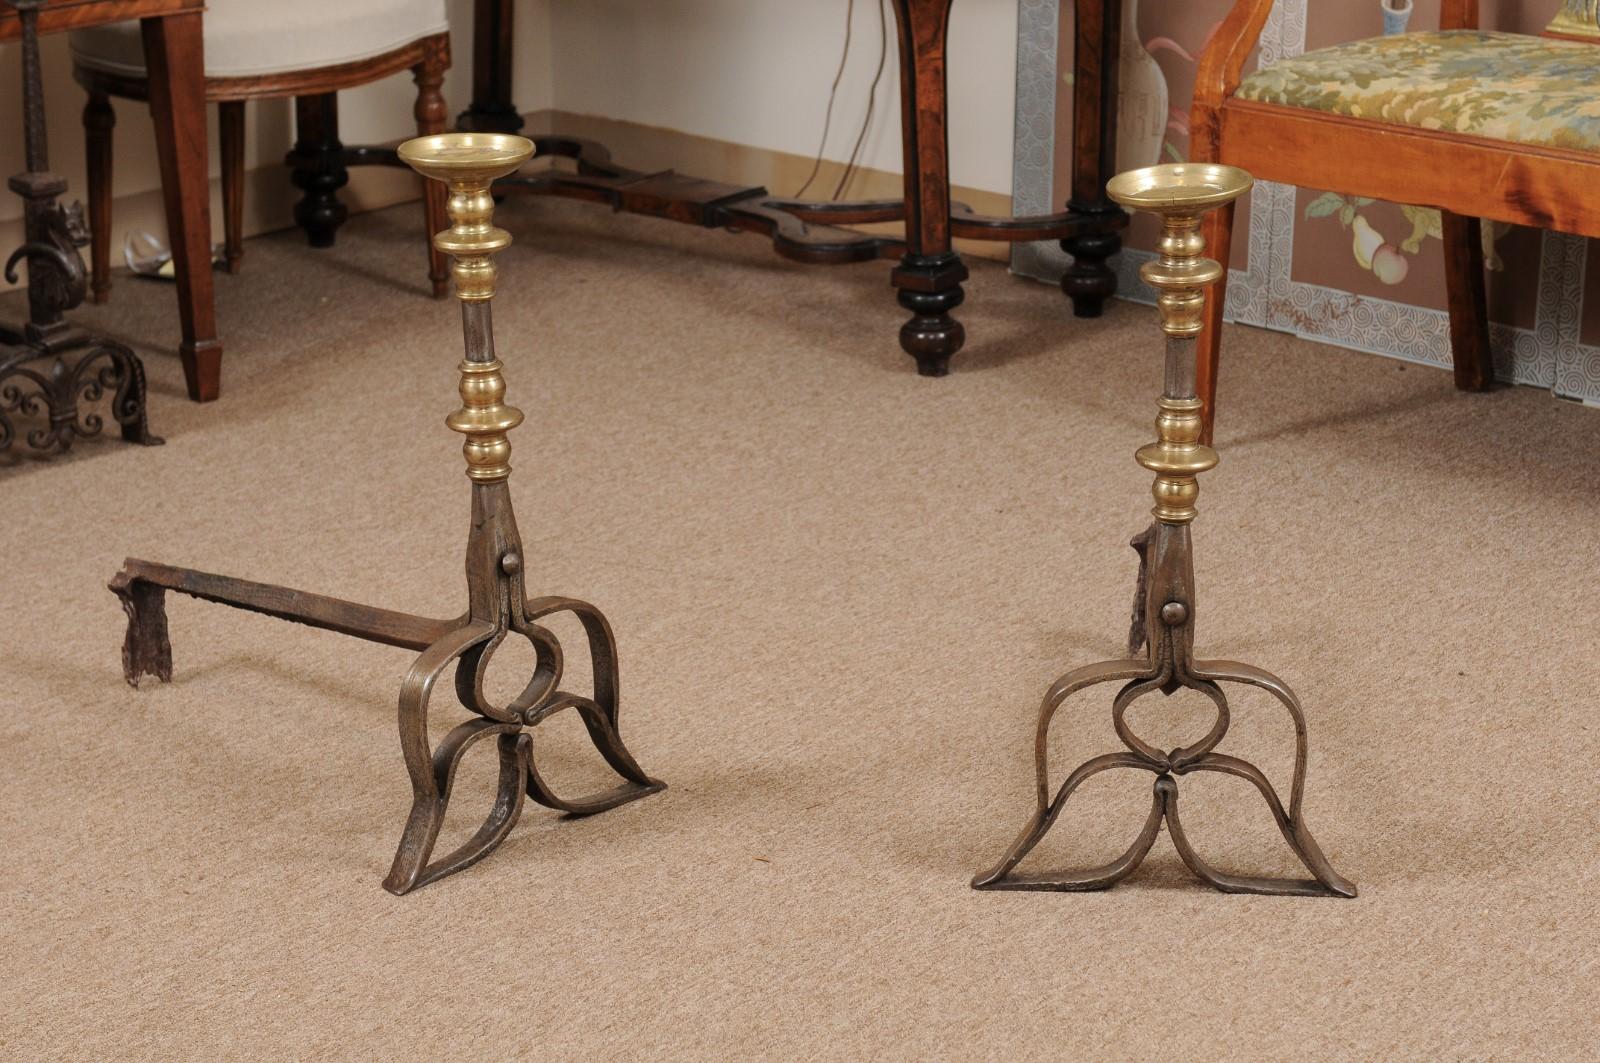 Pair of 16th century steel andirons with brass accents.